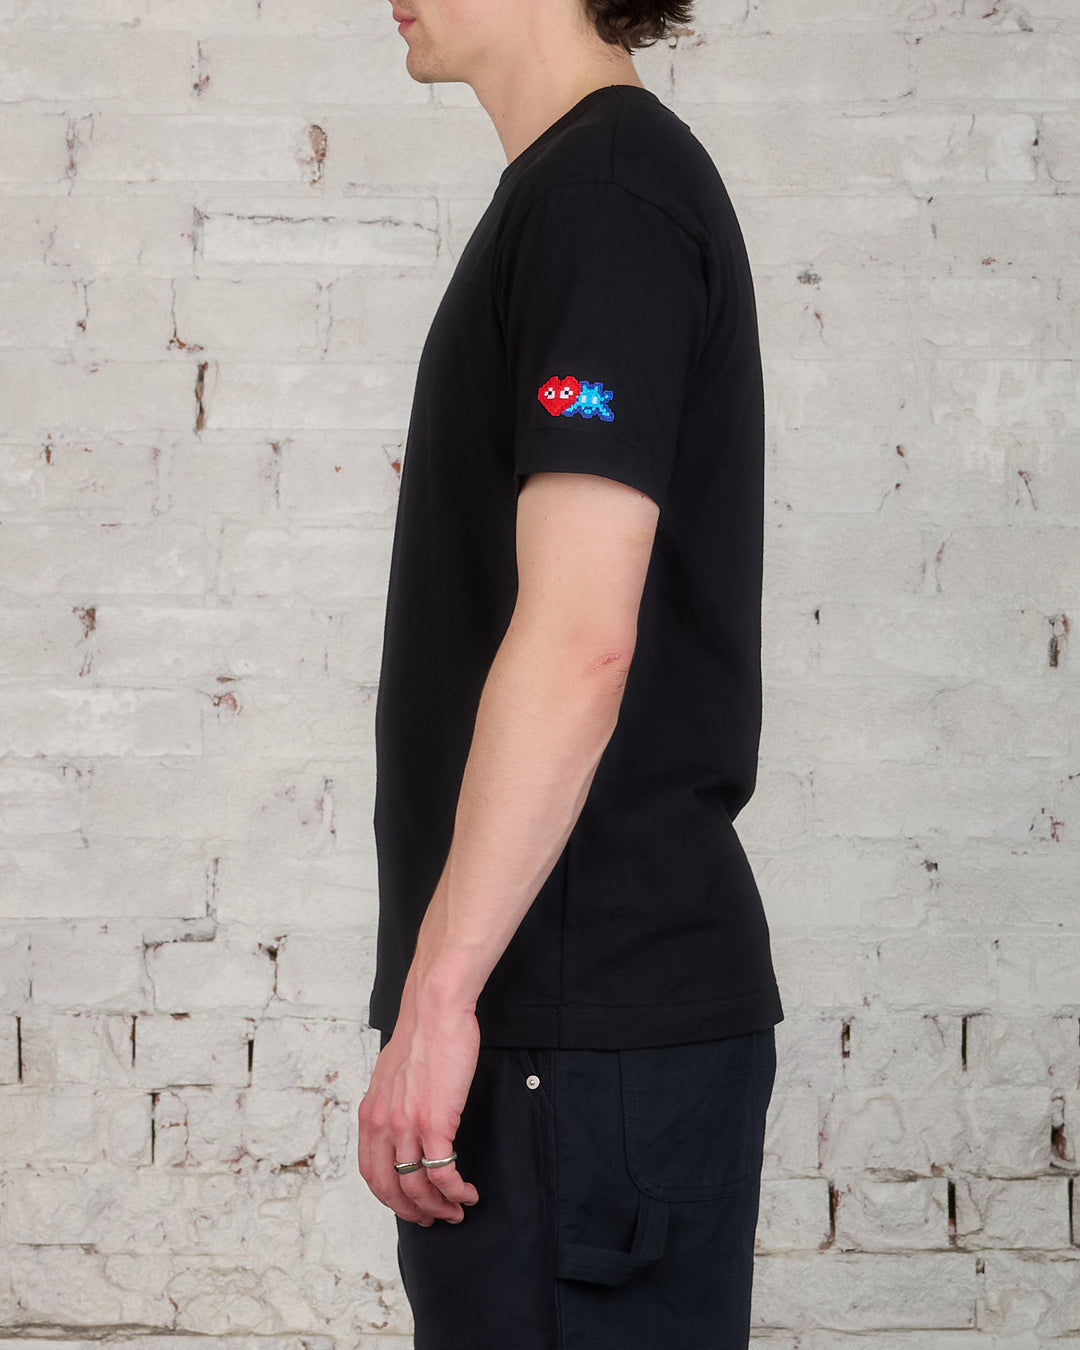 CDG PLAY Invader Red Heart Sleeve T-Shirt Black